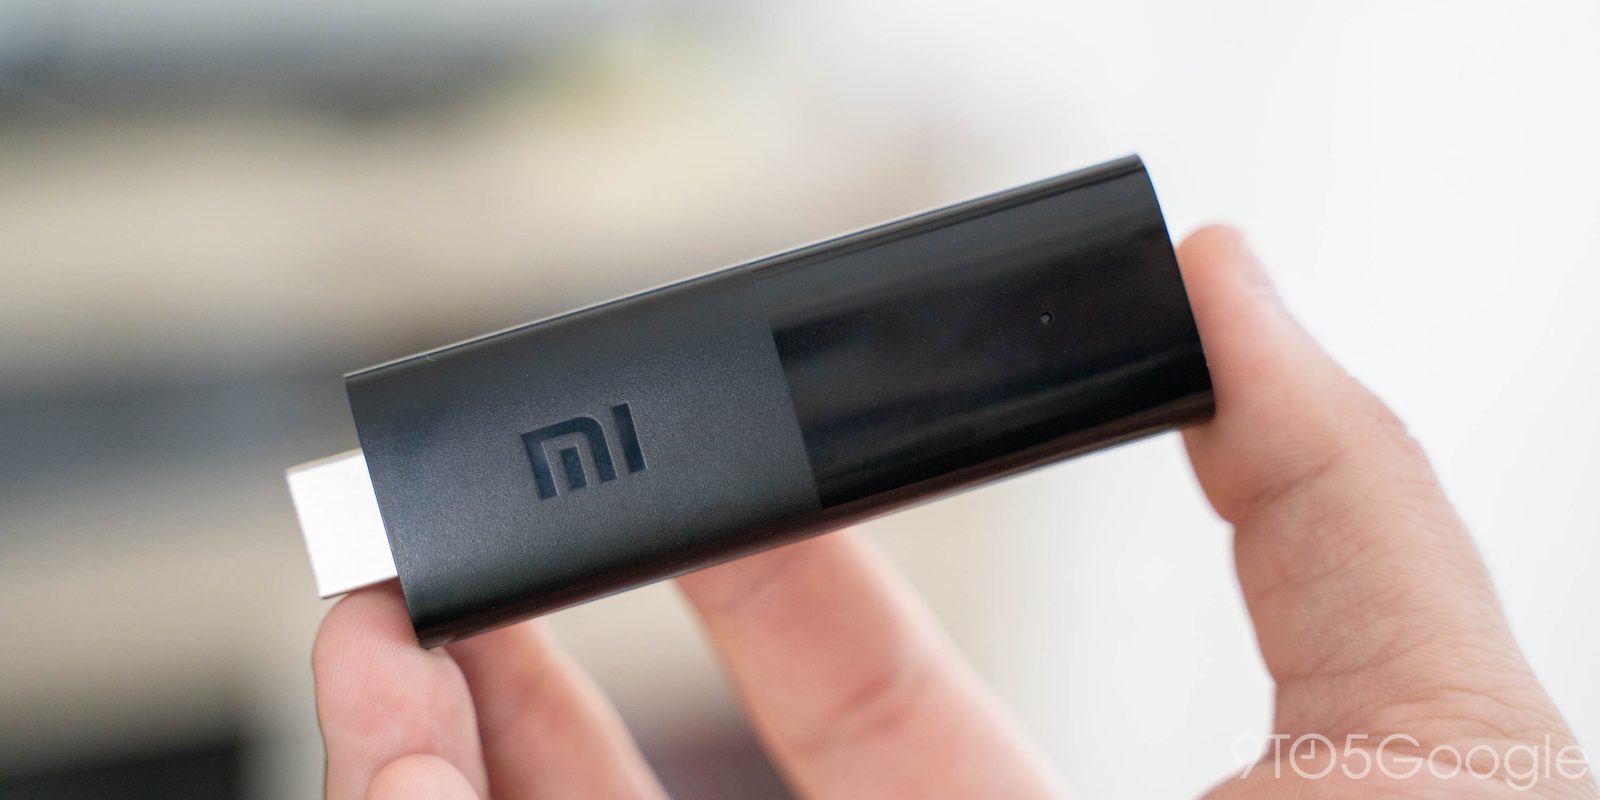 Xiaomi Mi Box S Review: The best Android TV for most users - 9to5Google